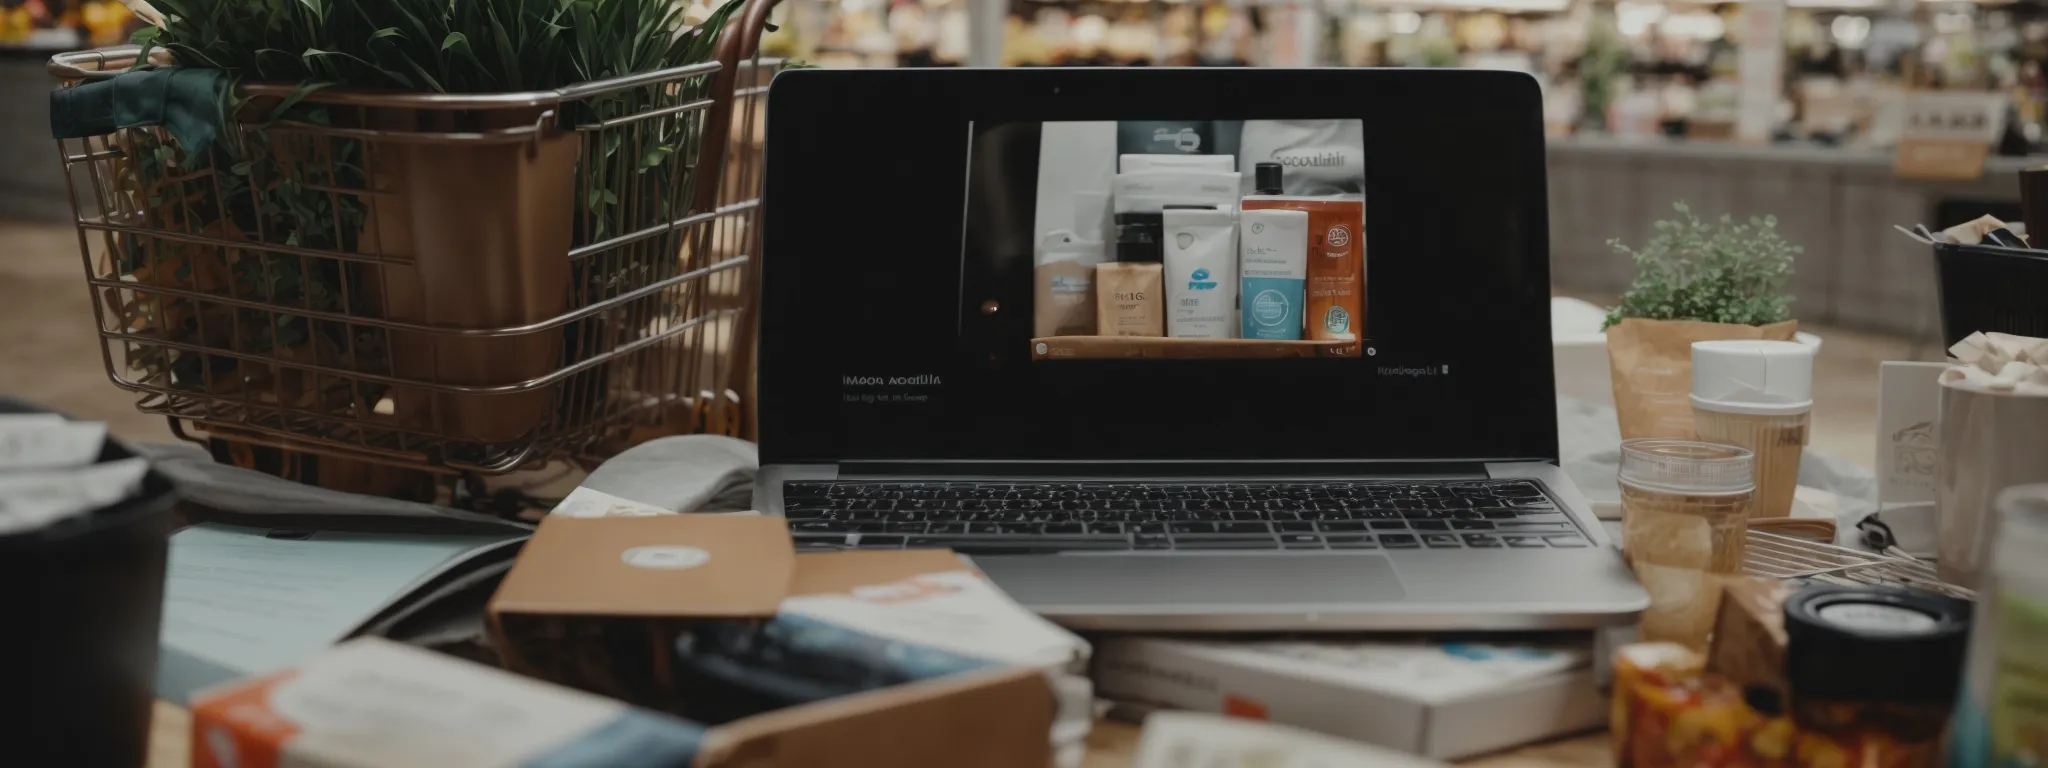 a laptop with social media streams opened beside a shopping cart filled with boxed products.